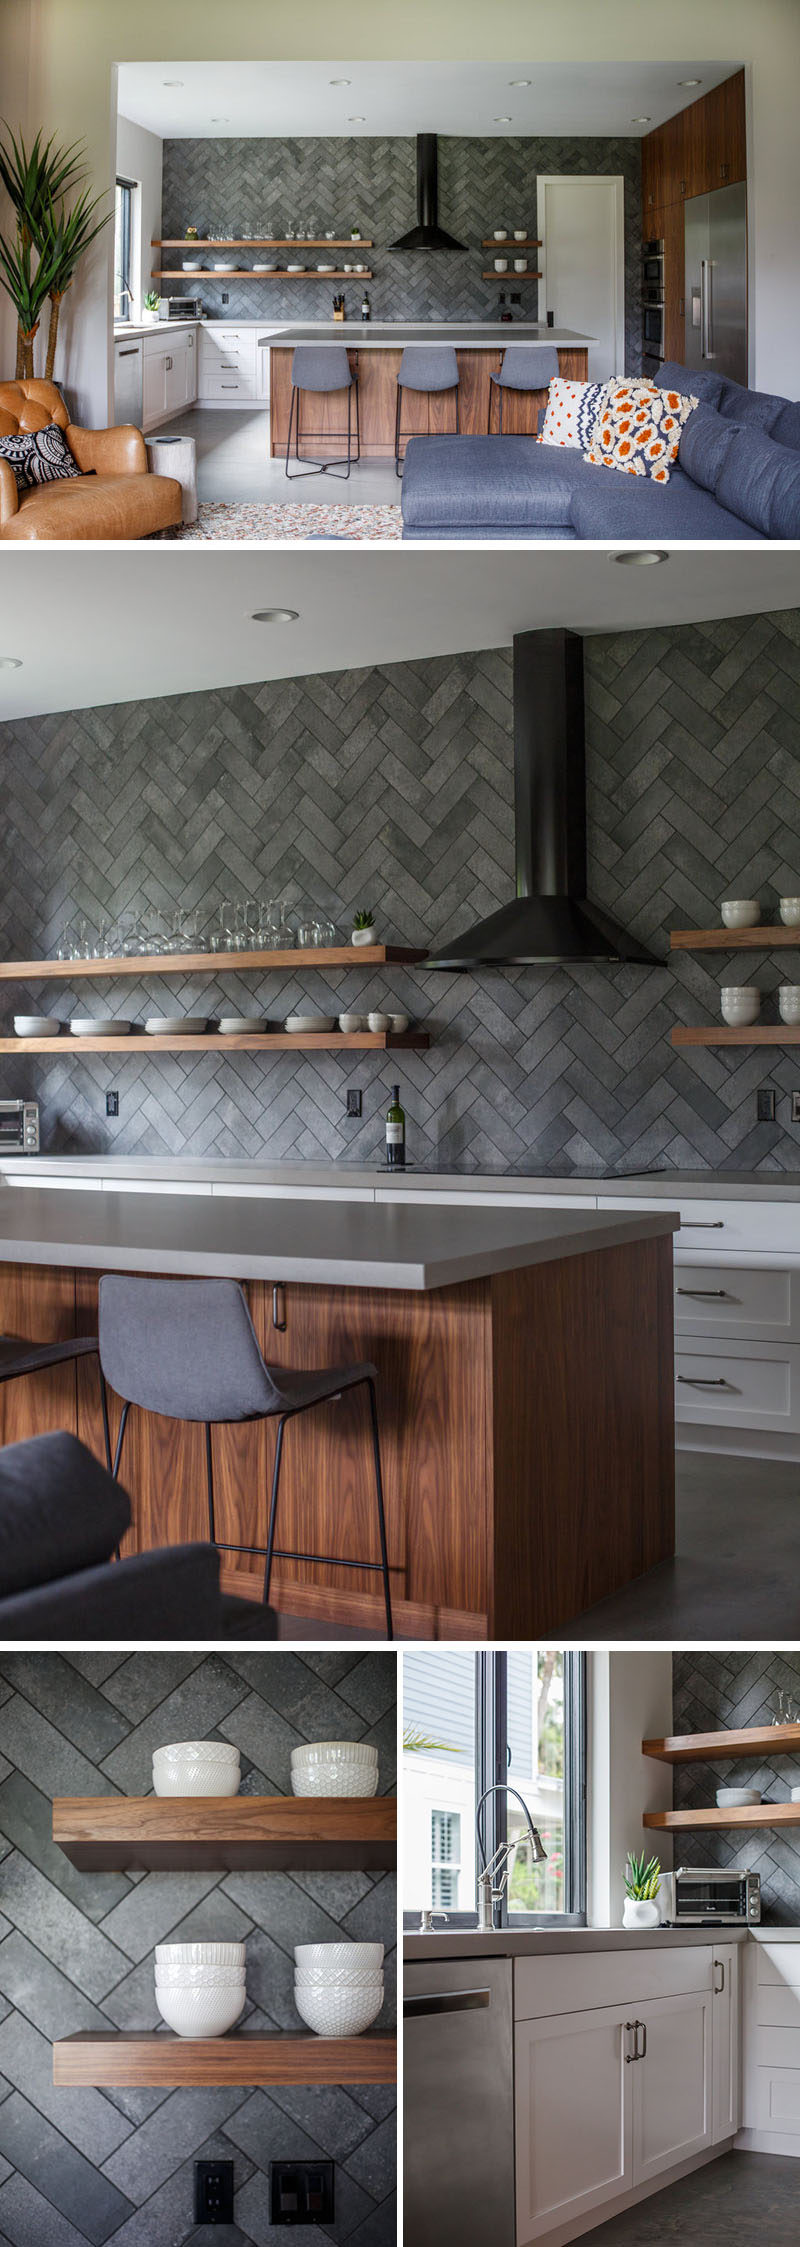  In this modern kitchen, grey tiles in a herringbone pattern cover the wall, while floating wood shelves compliment the wood island. #ModernKitchen #KitchenDesign #InteriorDesign #GreyTiles #HerringbonePattern #FloatingShelves